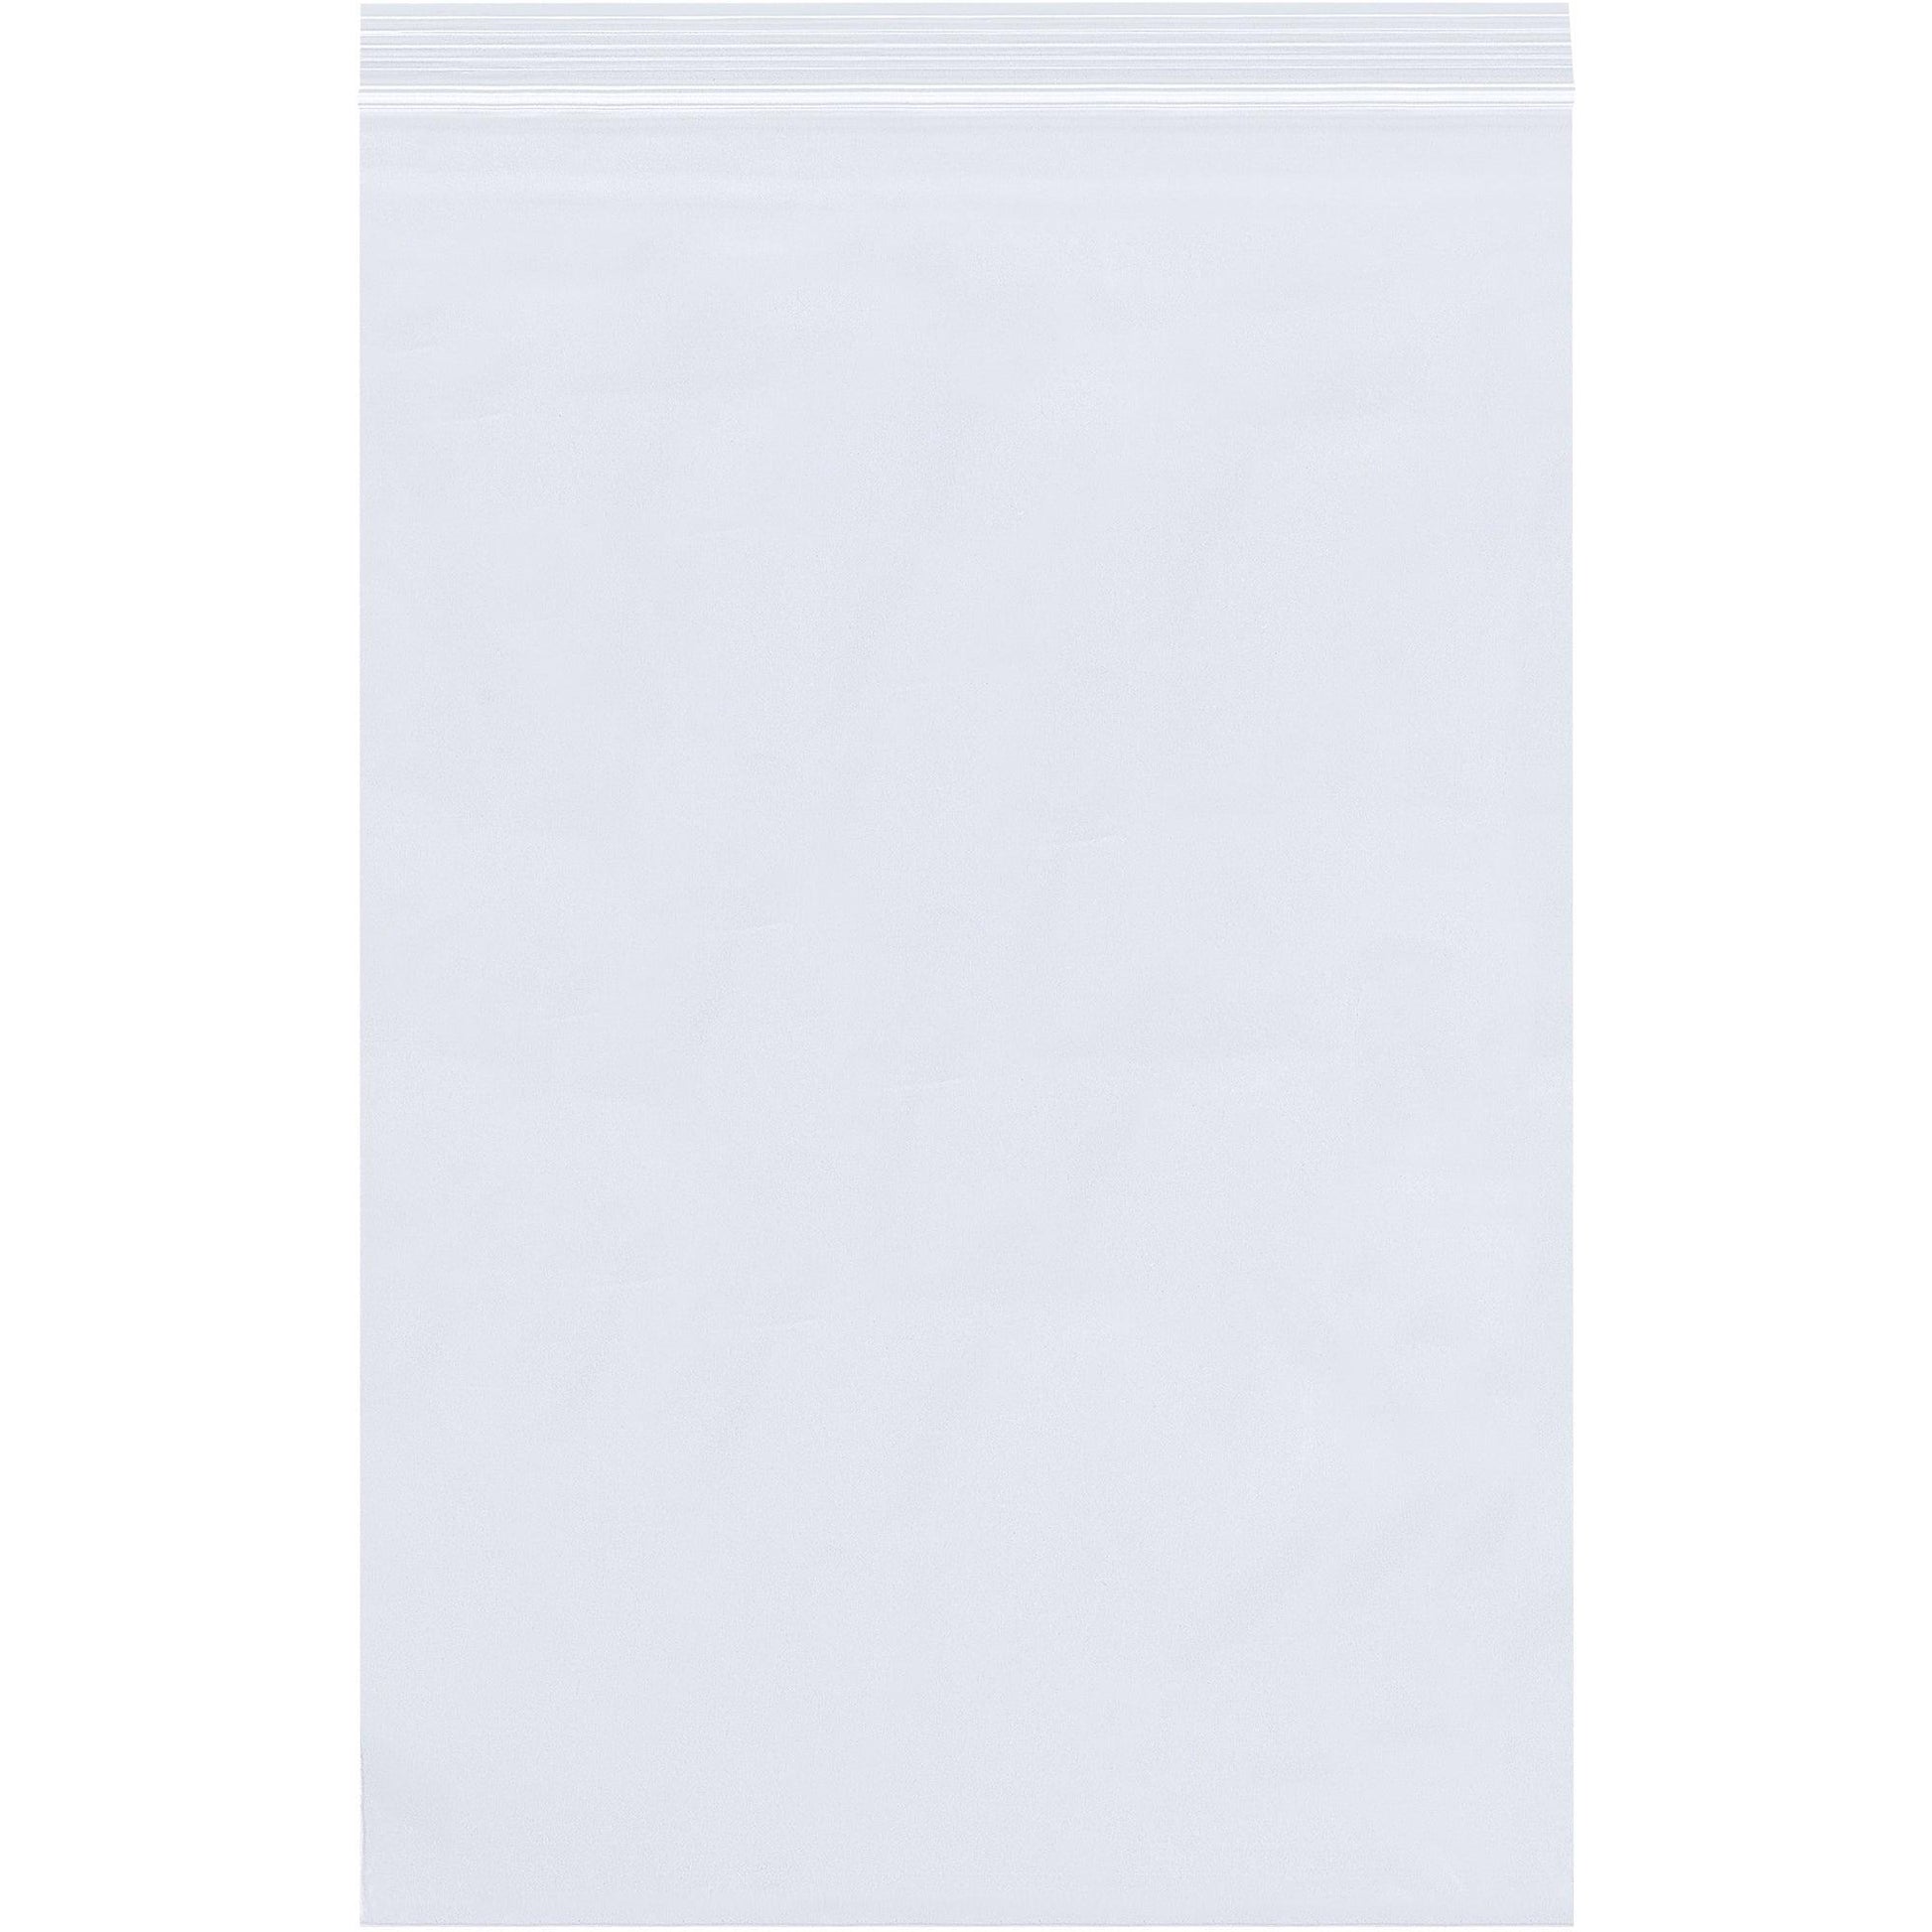 14 x 20" - 4 Mil Reclosable Poly Bags - PB3799